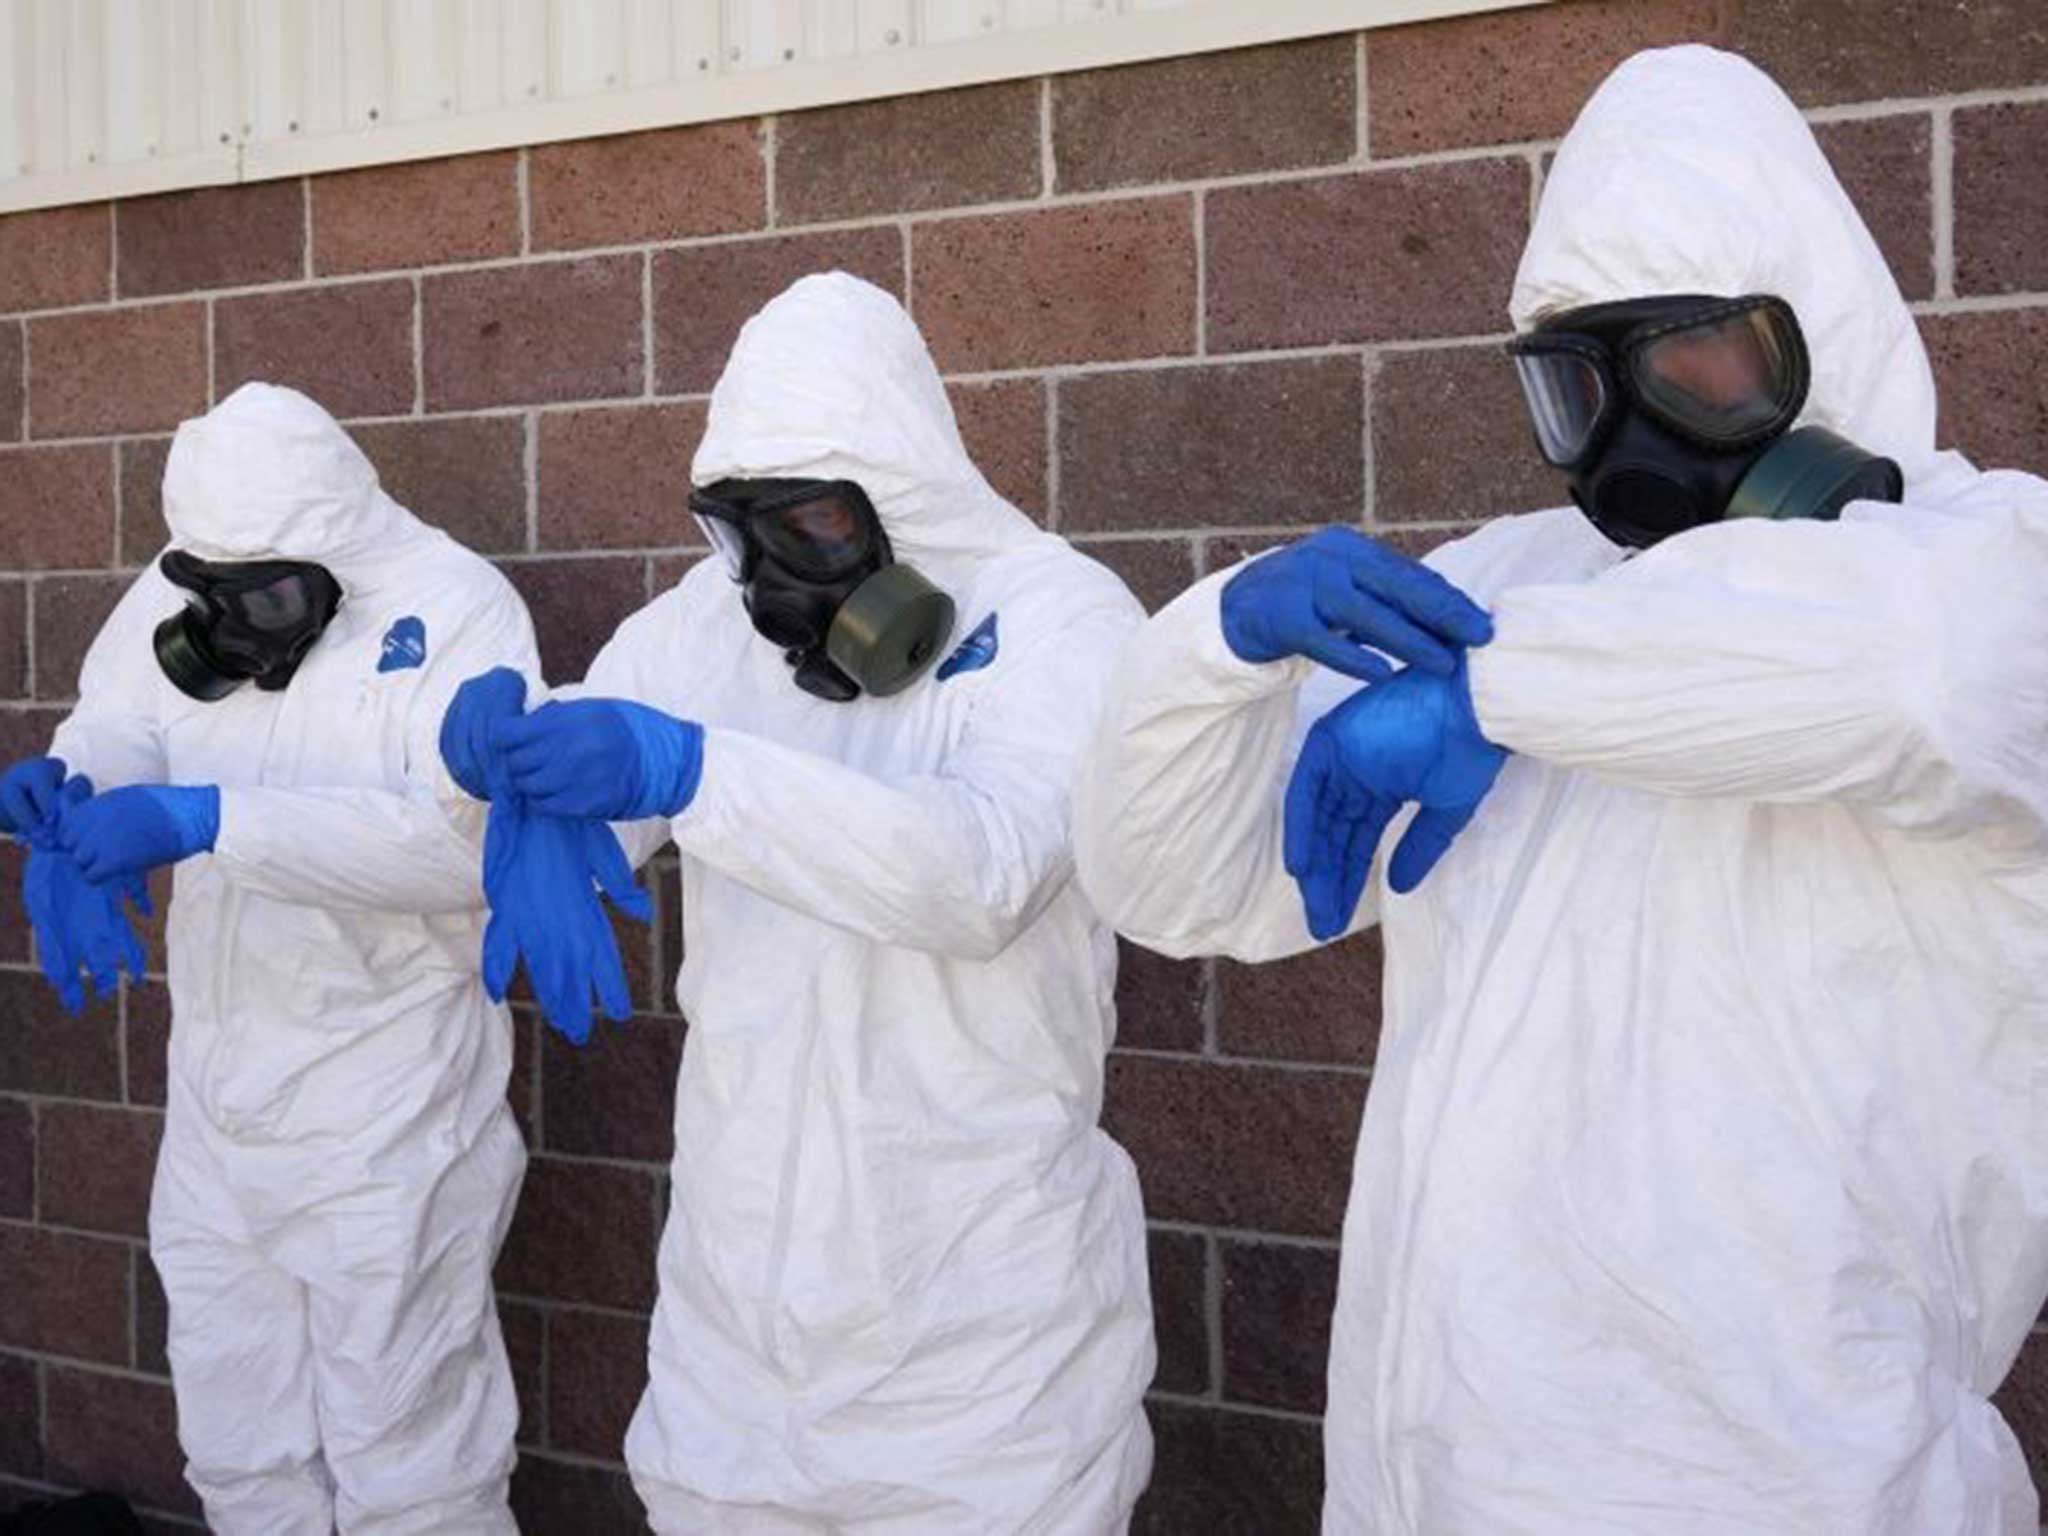 Soldiers from the US Army during personal protective equipment training, as a report critique the DHS' preparations for an outbreak